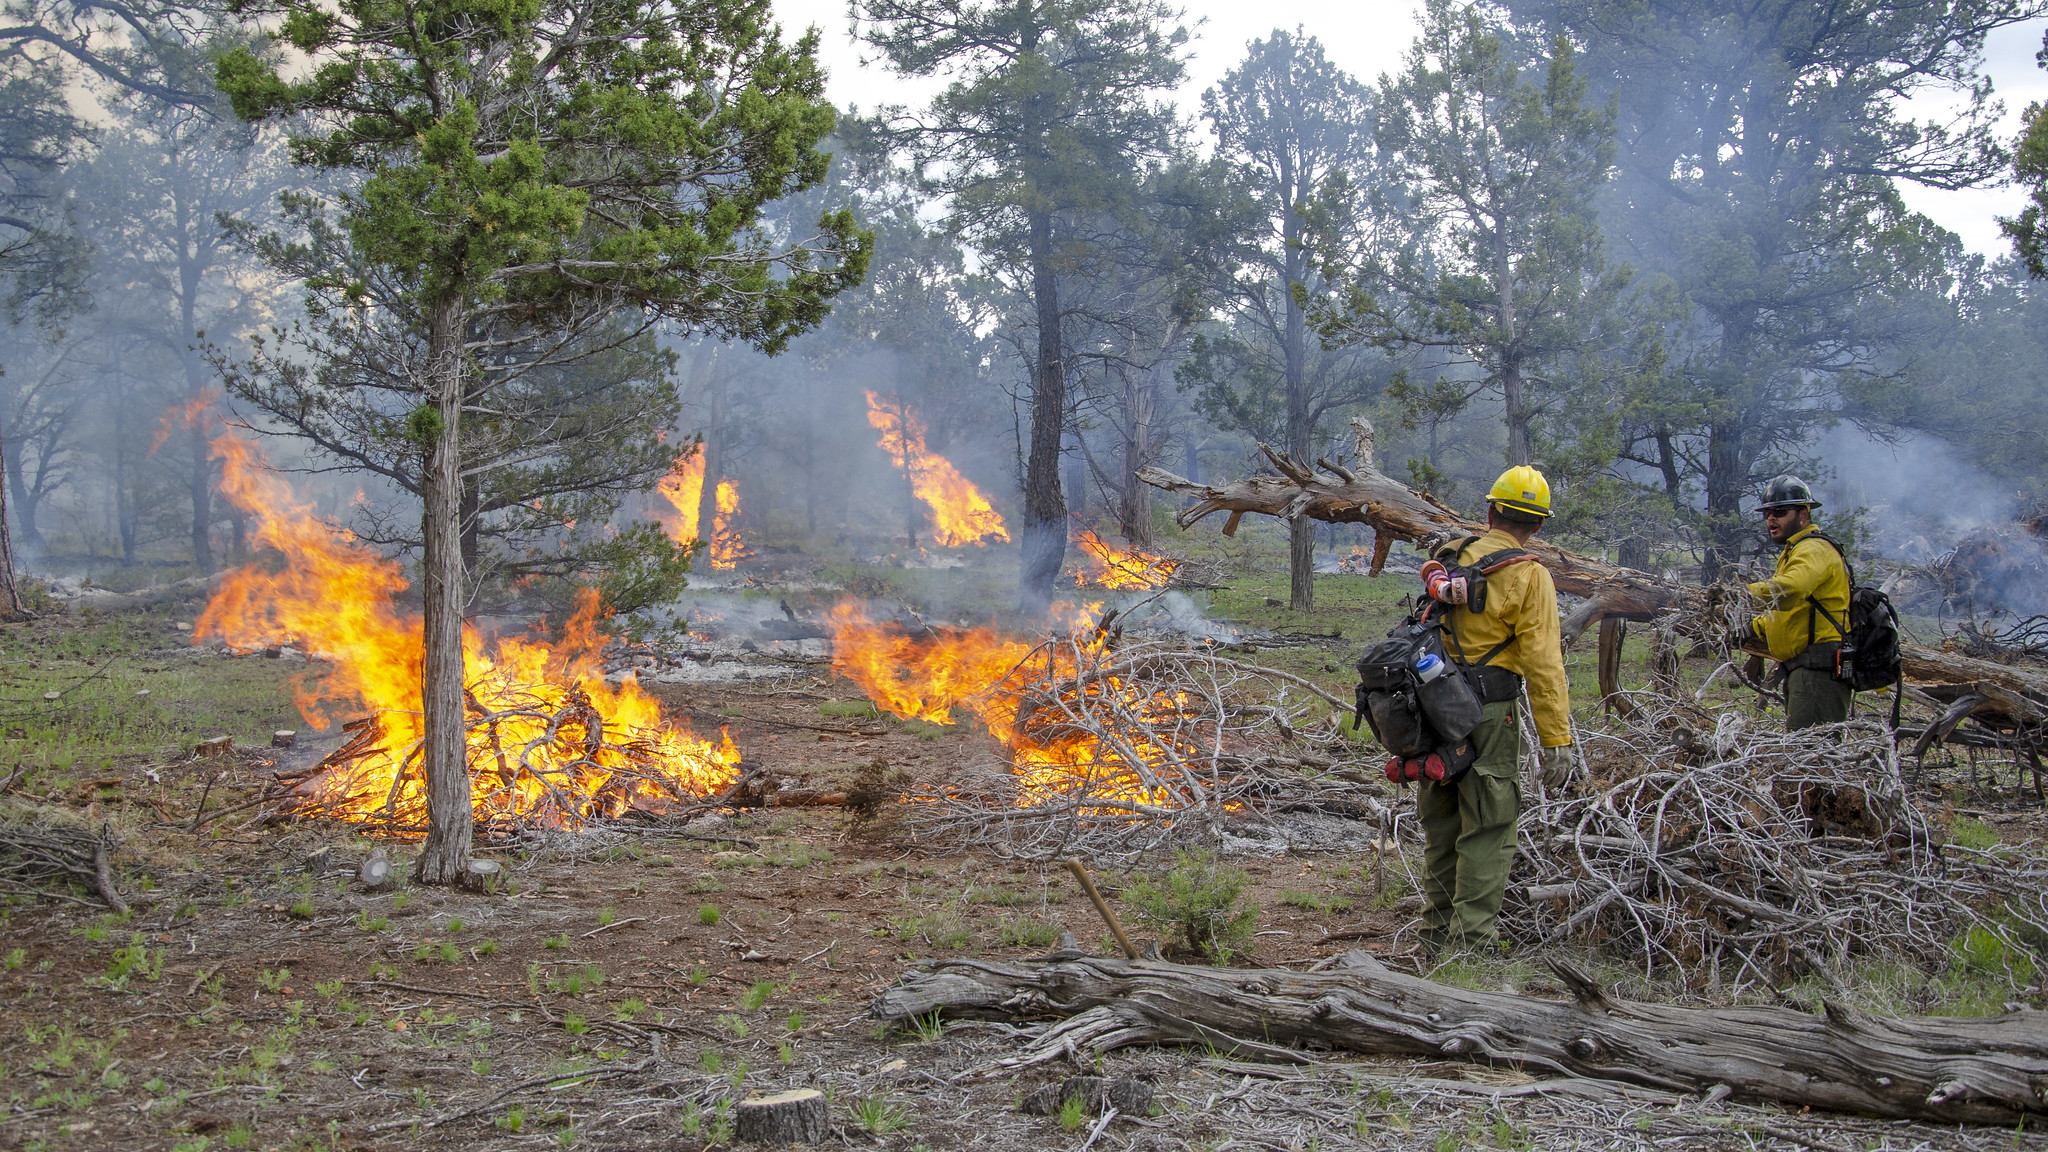 A small crew of wildland firefighters monitor an active fire